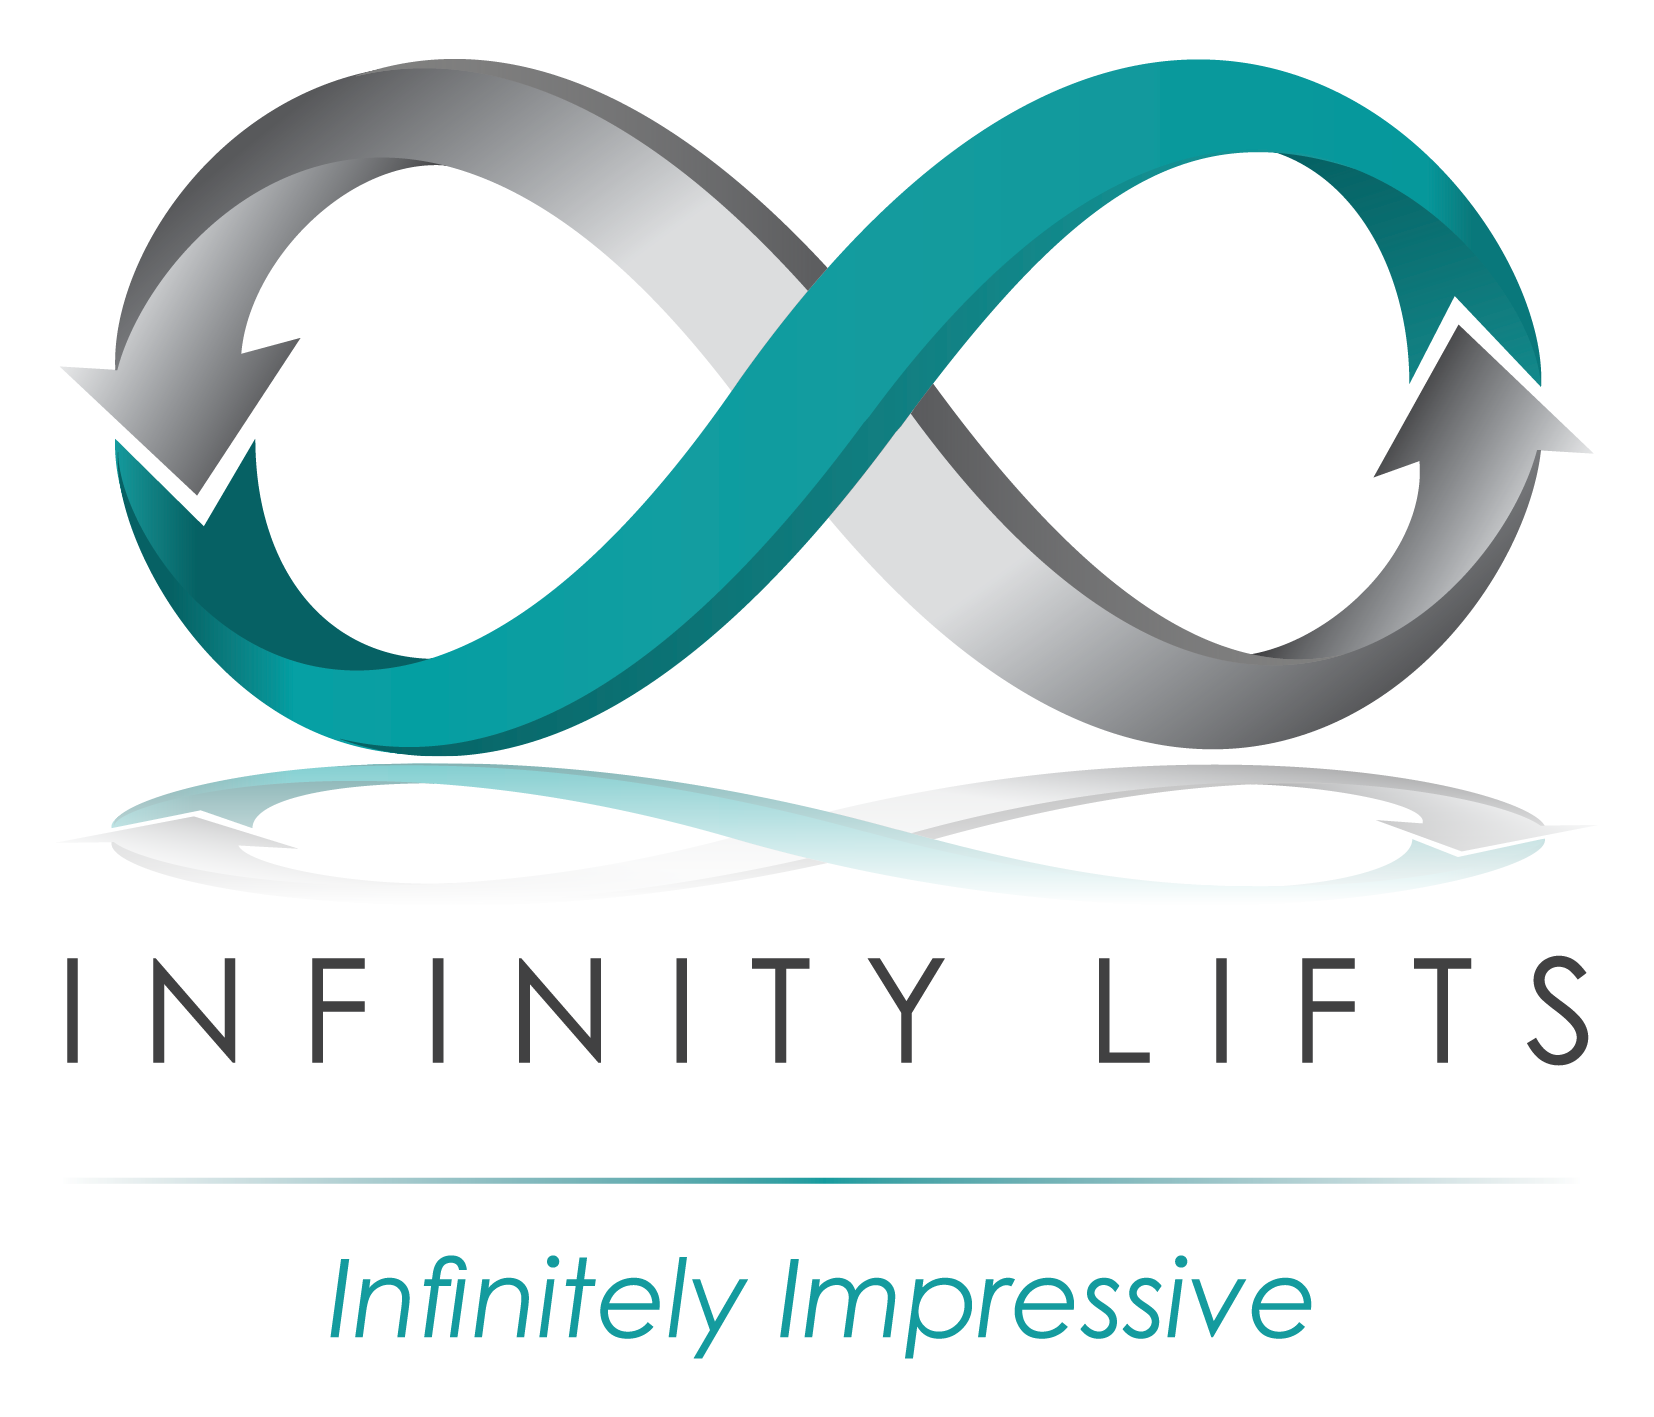 Infinity lifts